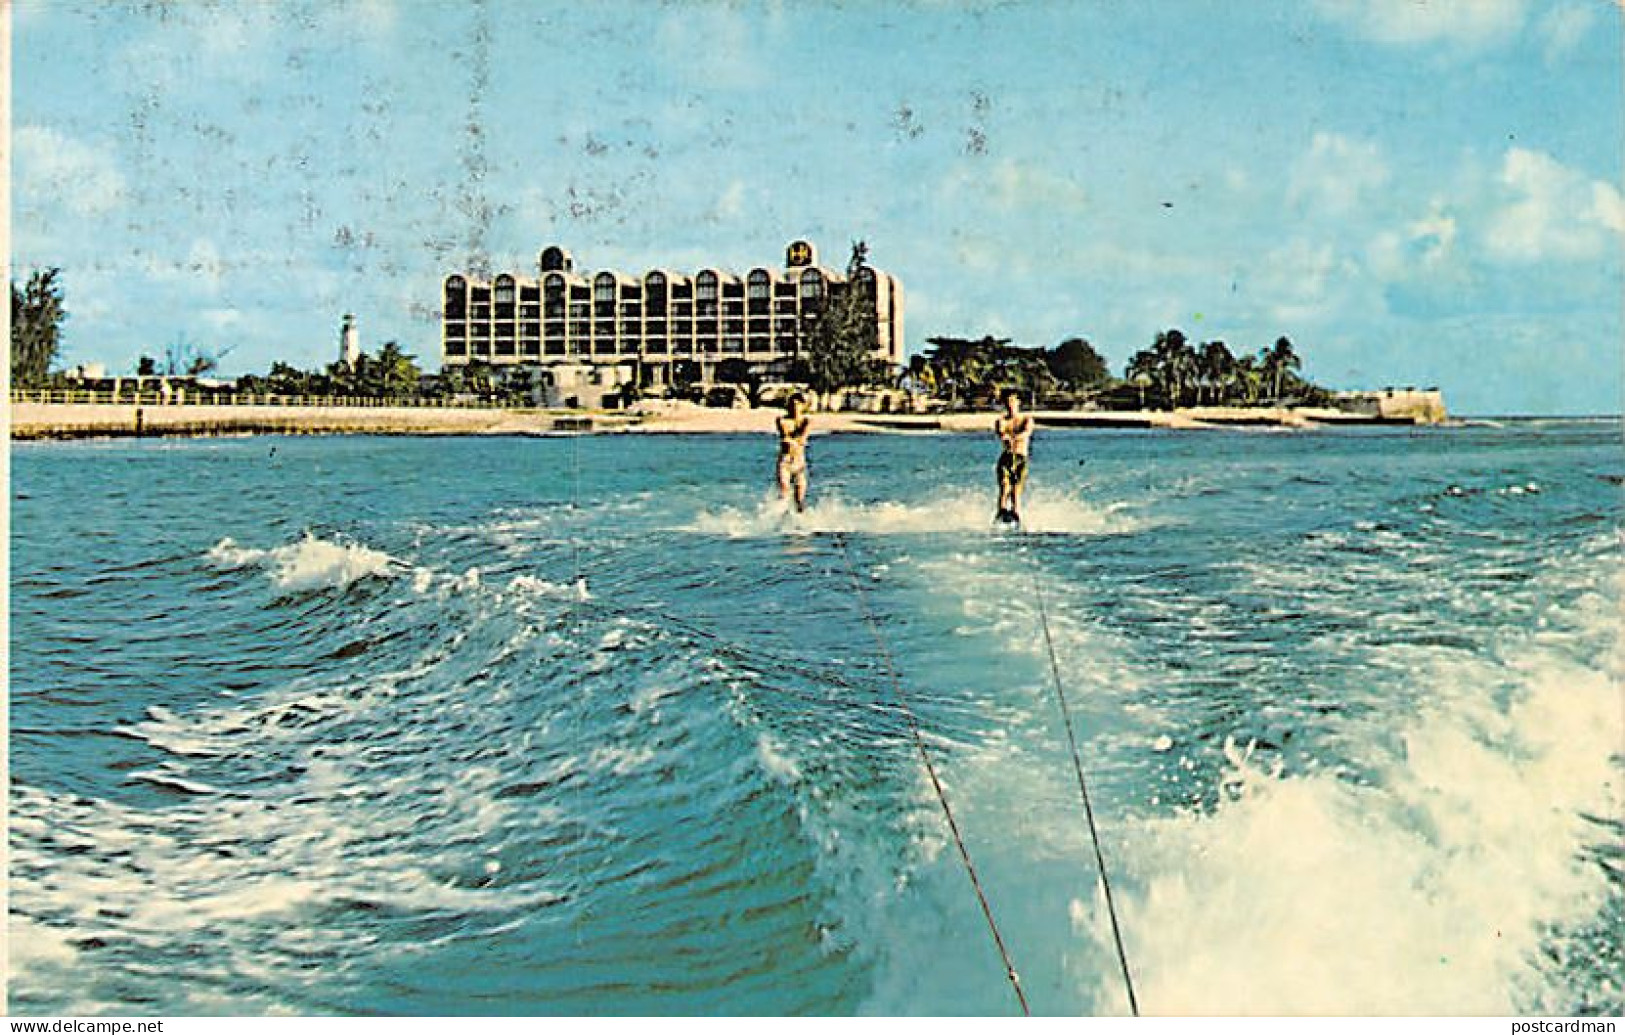 BARBADOS - Water Skiing - New Hilton Hotel - Publ. C. L. Pitt & Co. Ltd.  - Barbades